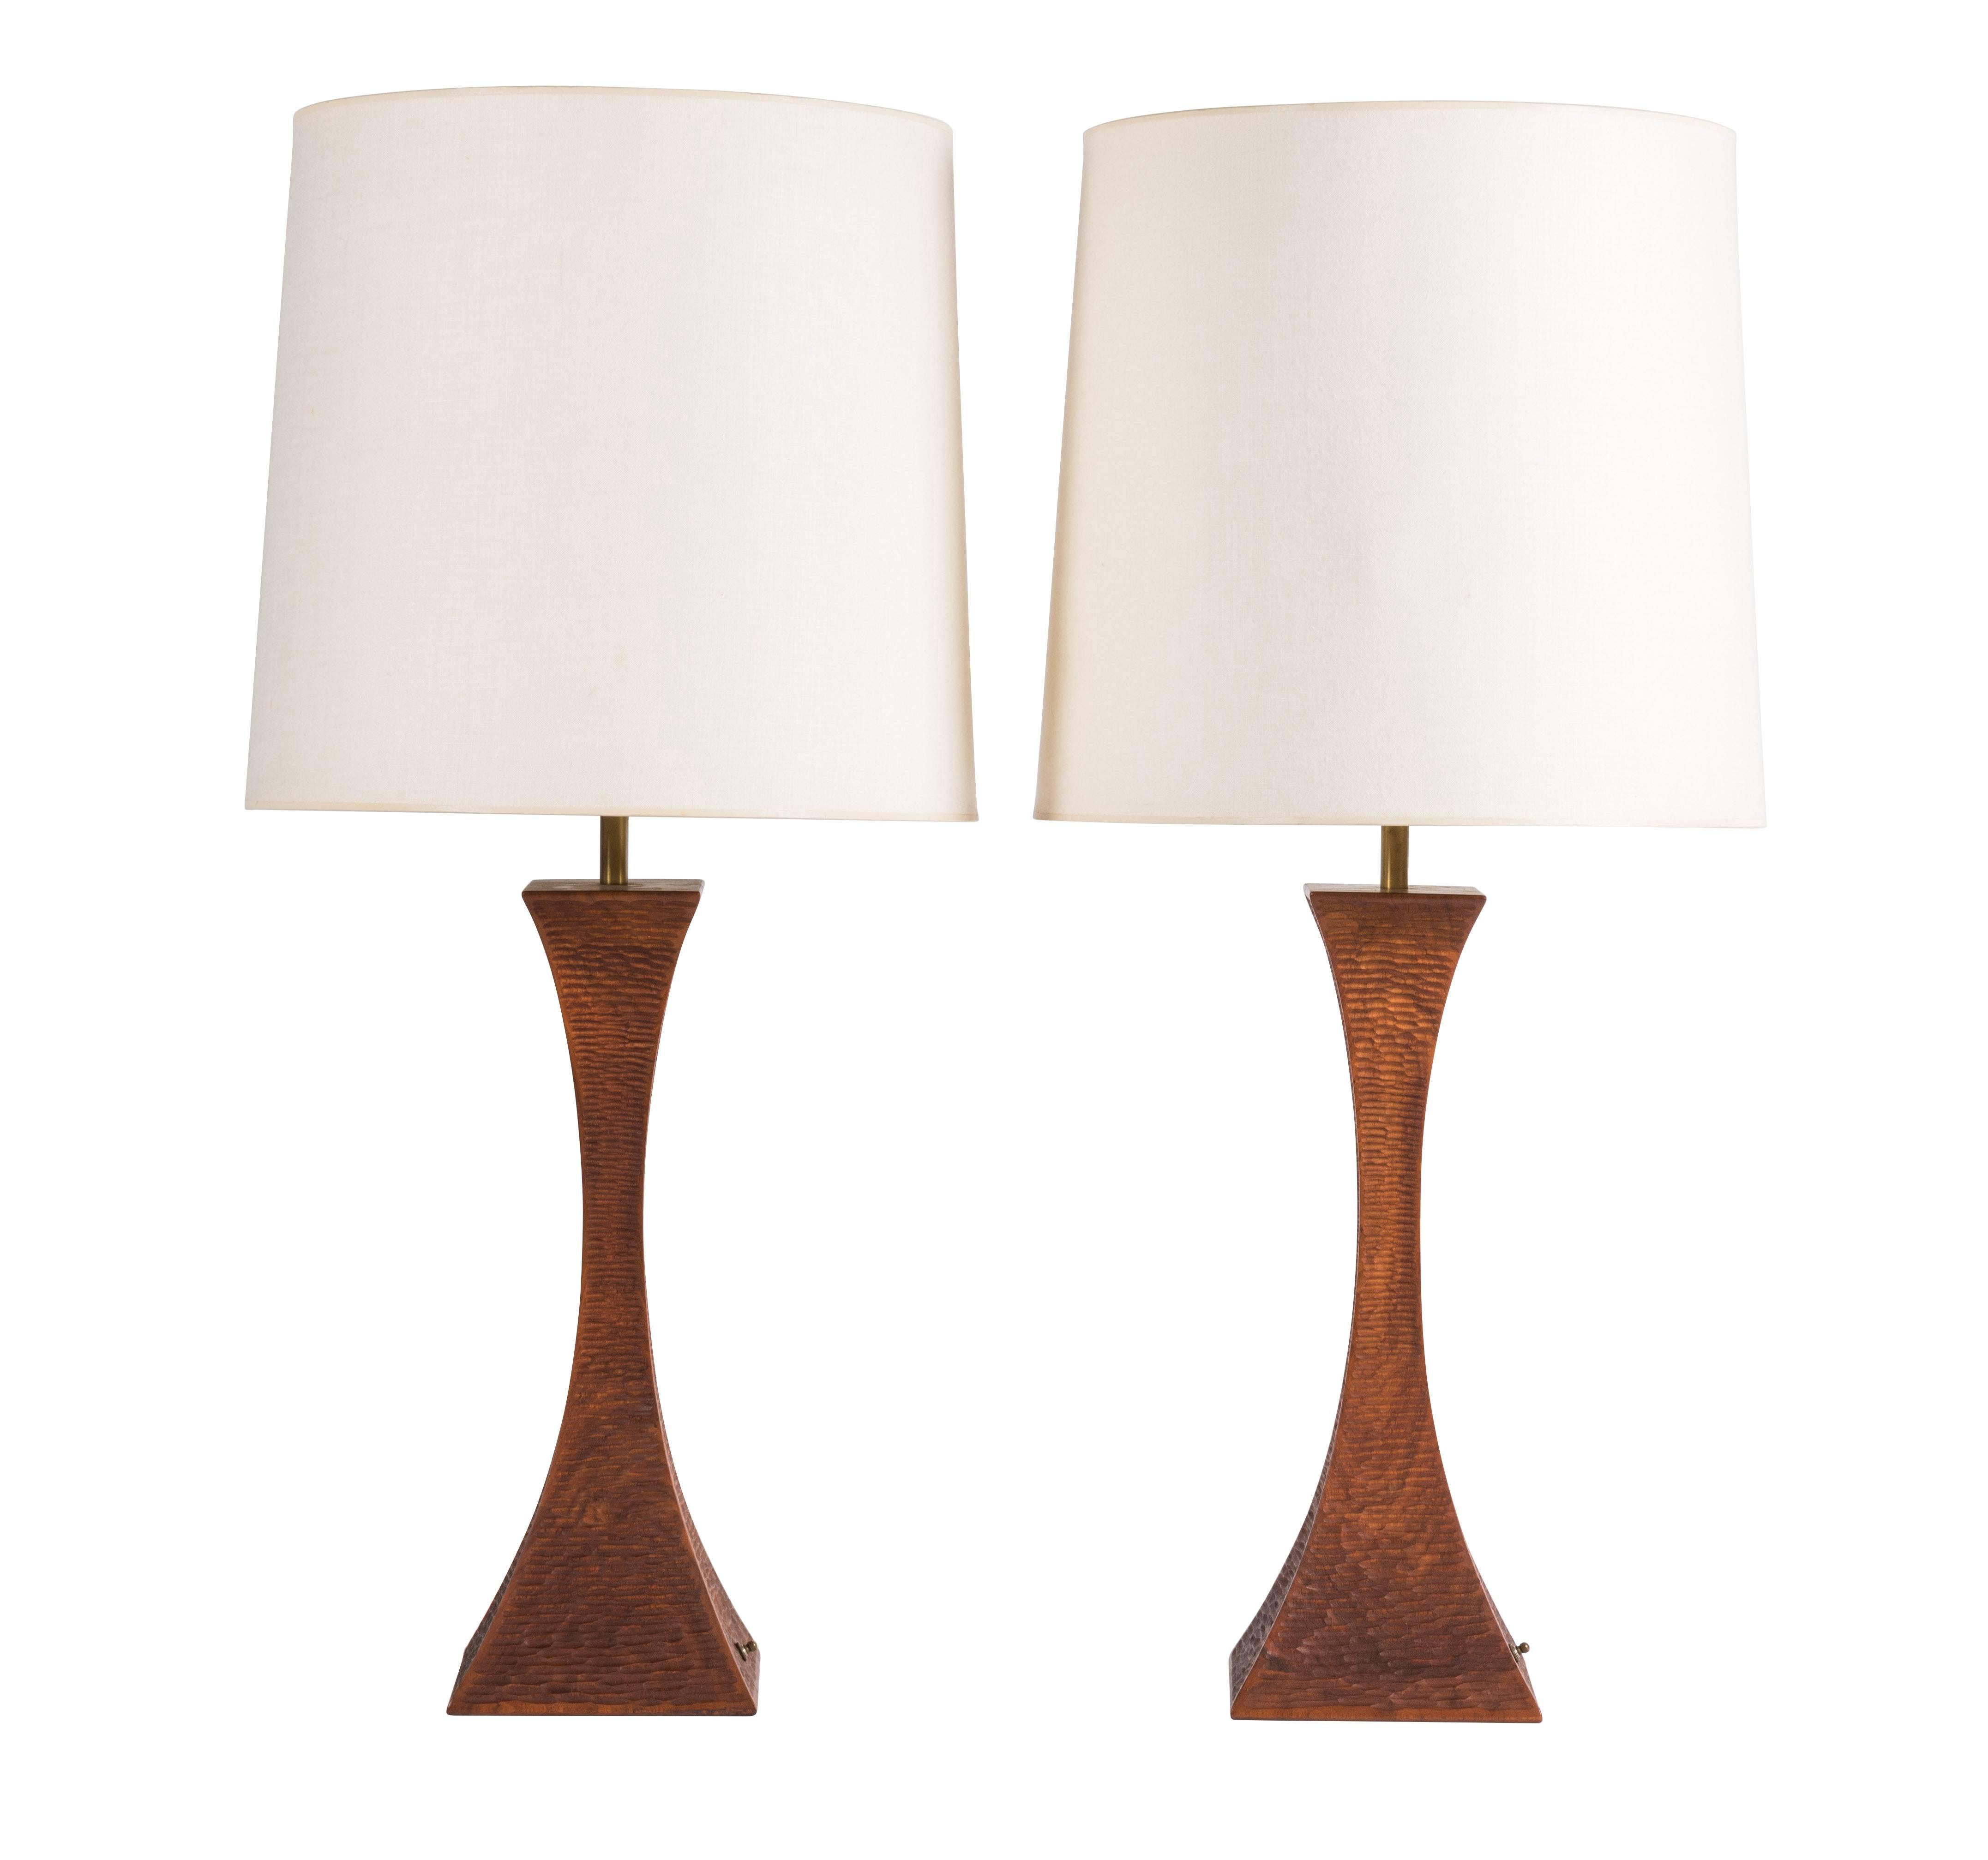 Pair of walnut chip-carved walnut table lamps by Robert Whitley. These lamps and the following listing are from a single owner named Florence Green, who commissioned Whitley to create a large collection of his work between 1965-1975 for her home in